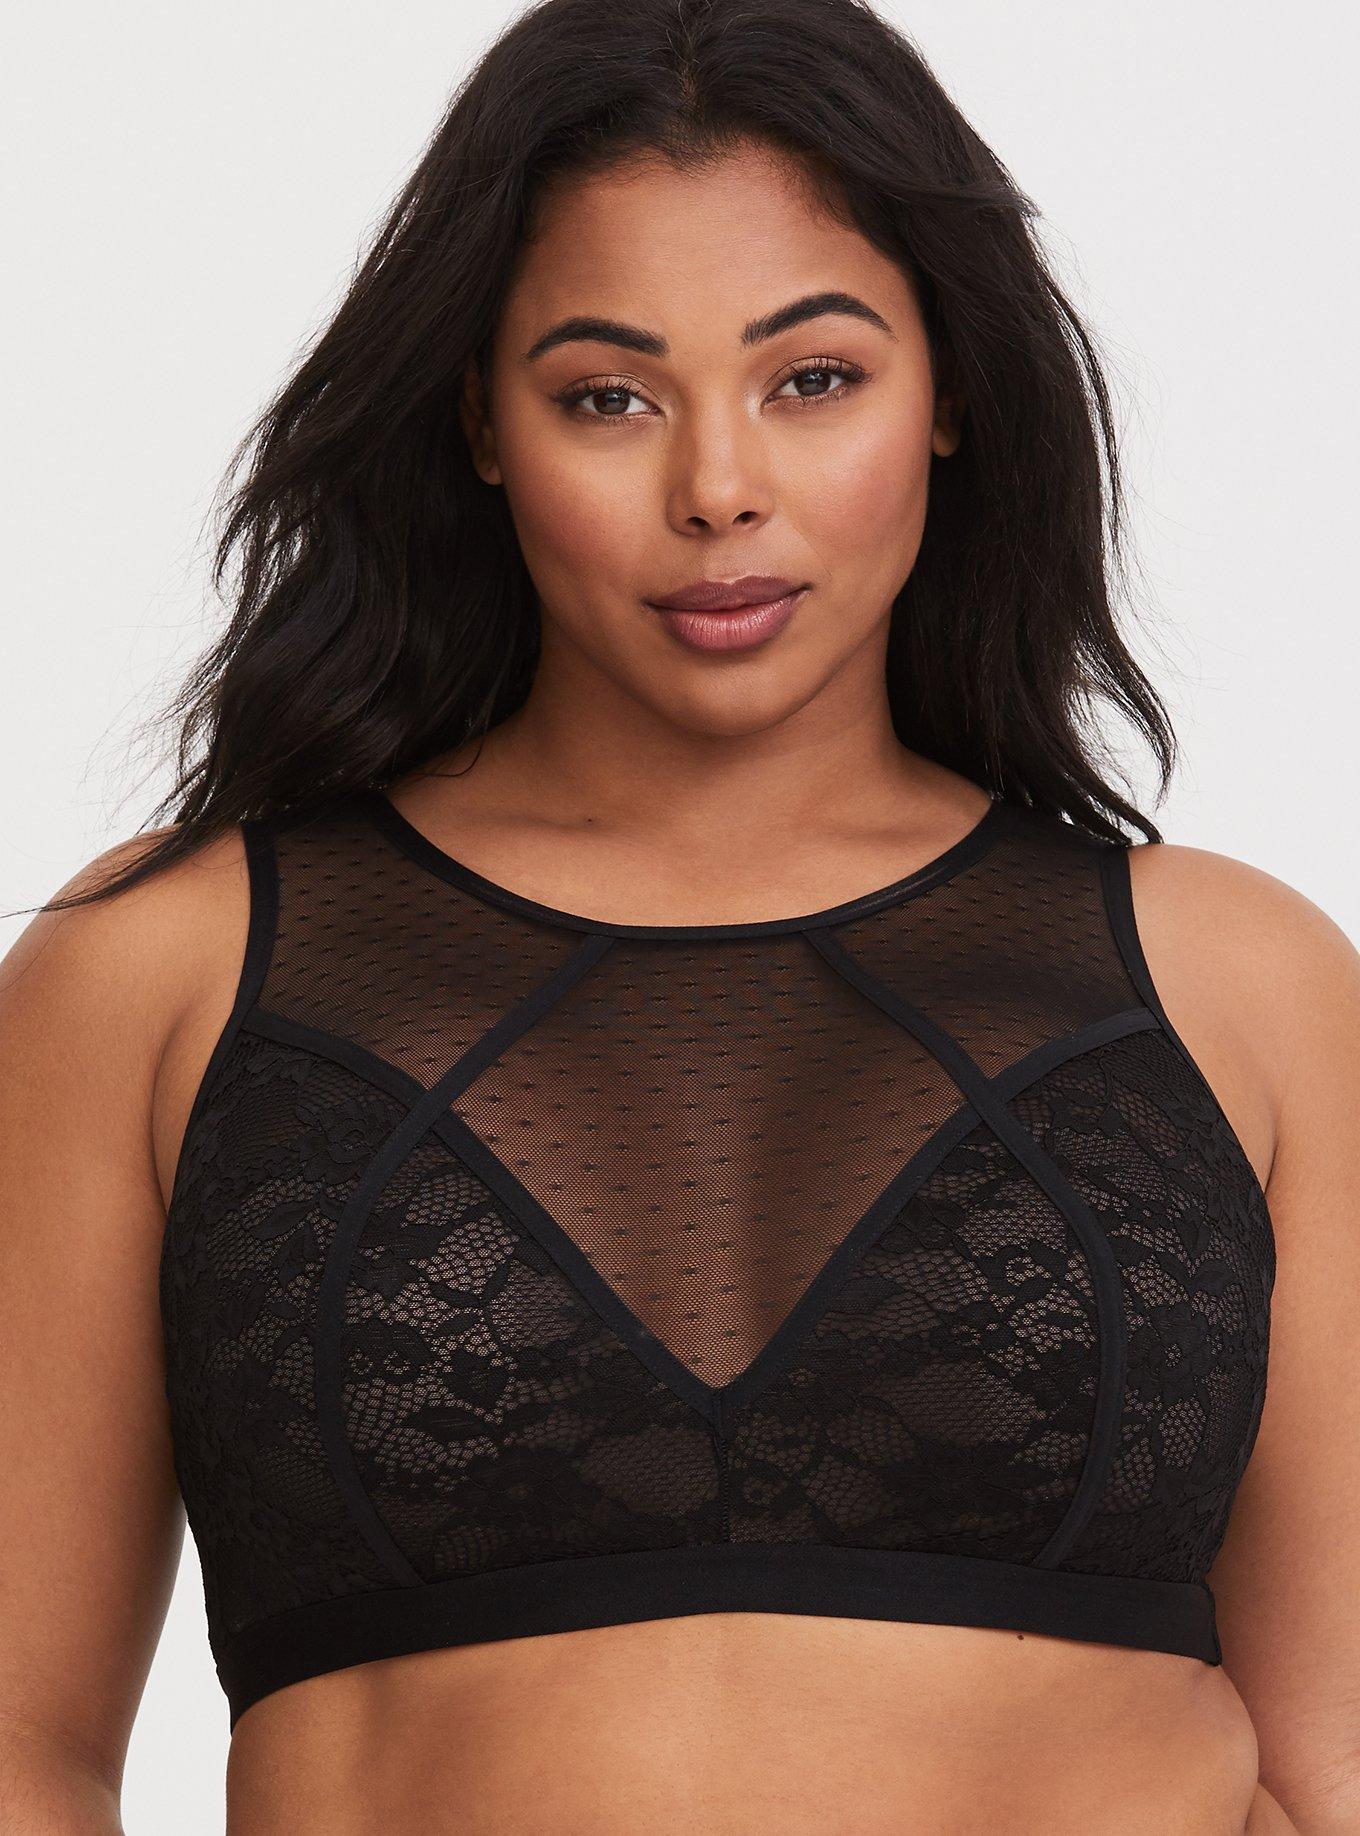 Leonisa high Neck Crop top lace Bralettes for Women